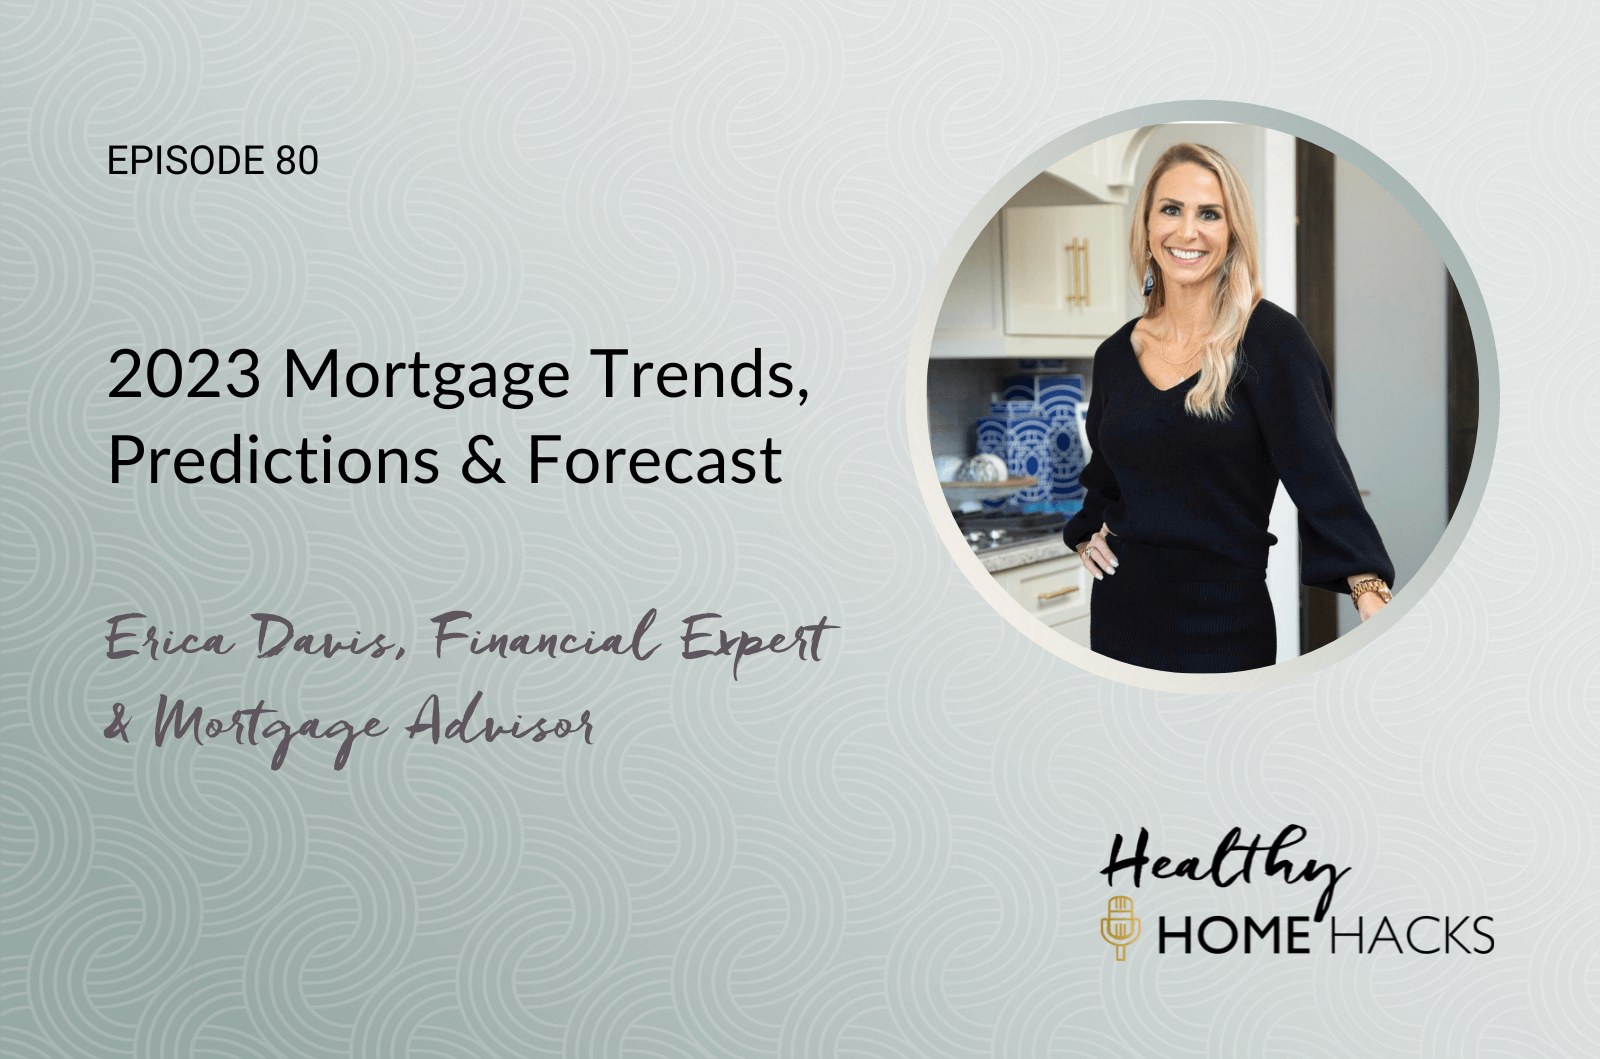 2023 Mortgage Trends, Predictions & Forecast